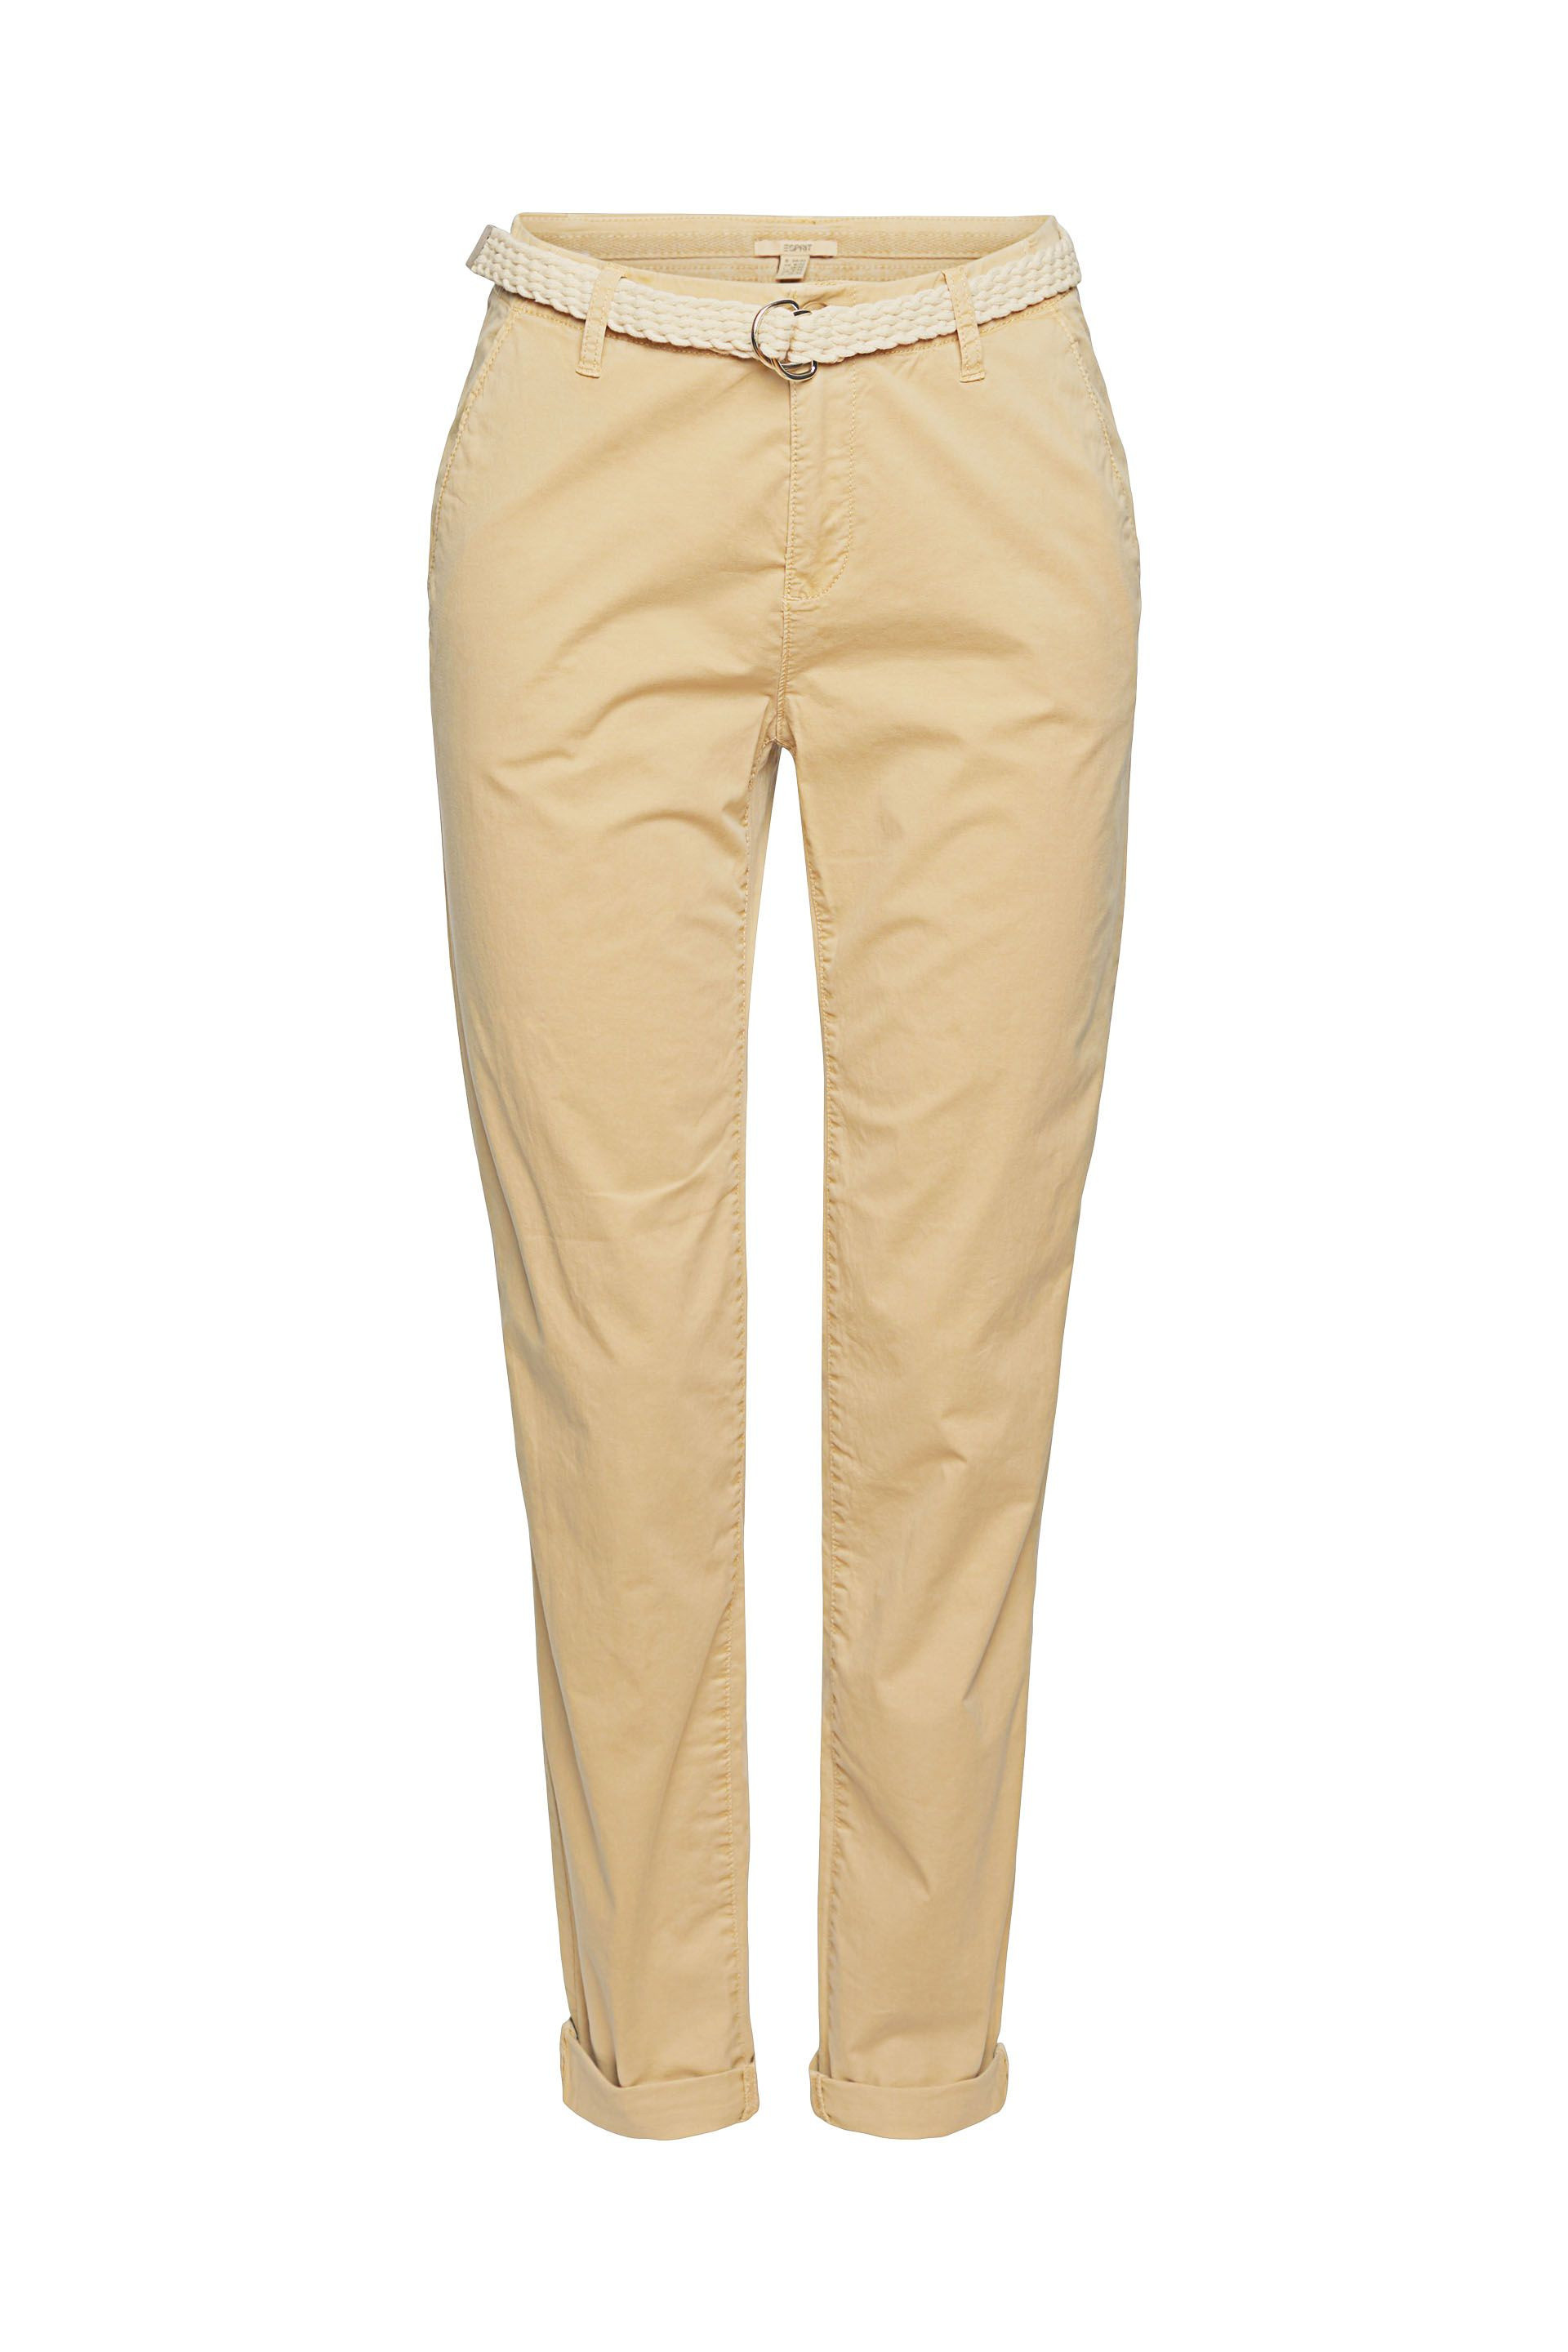 Chino trousers with woven belt, Beige, large image number 0